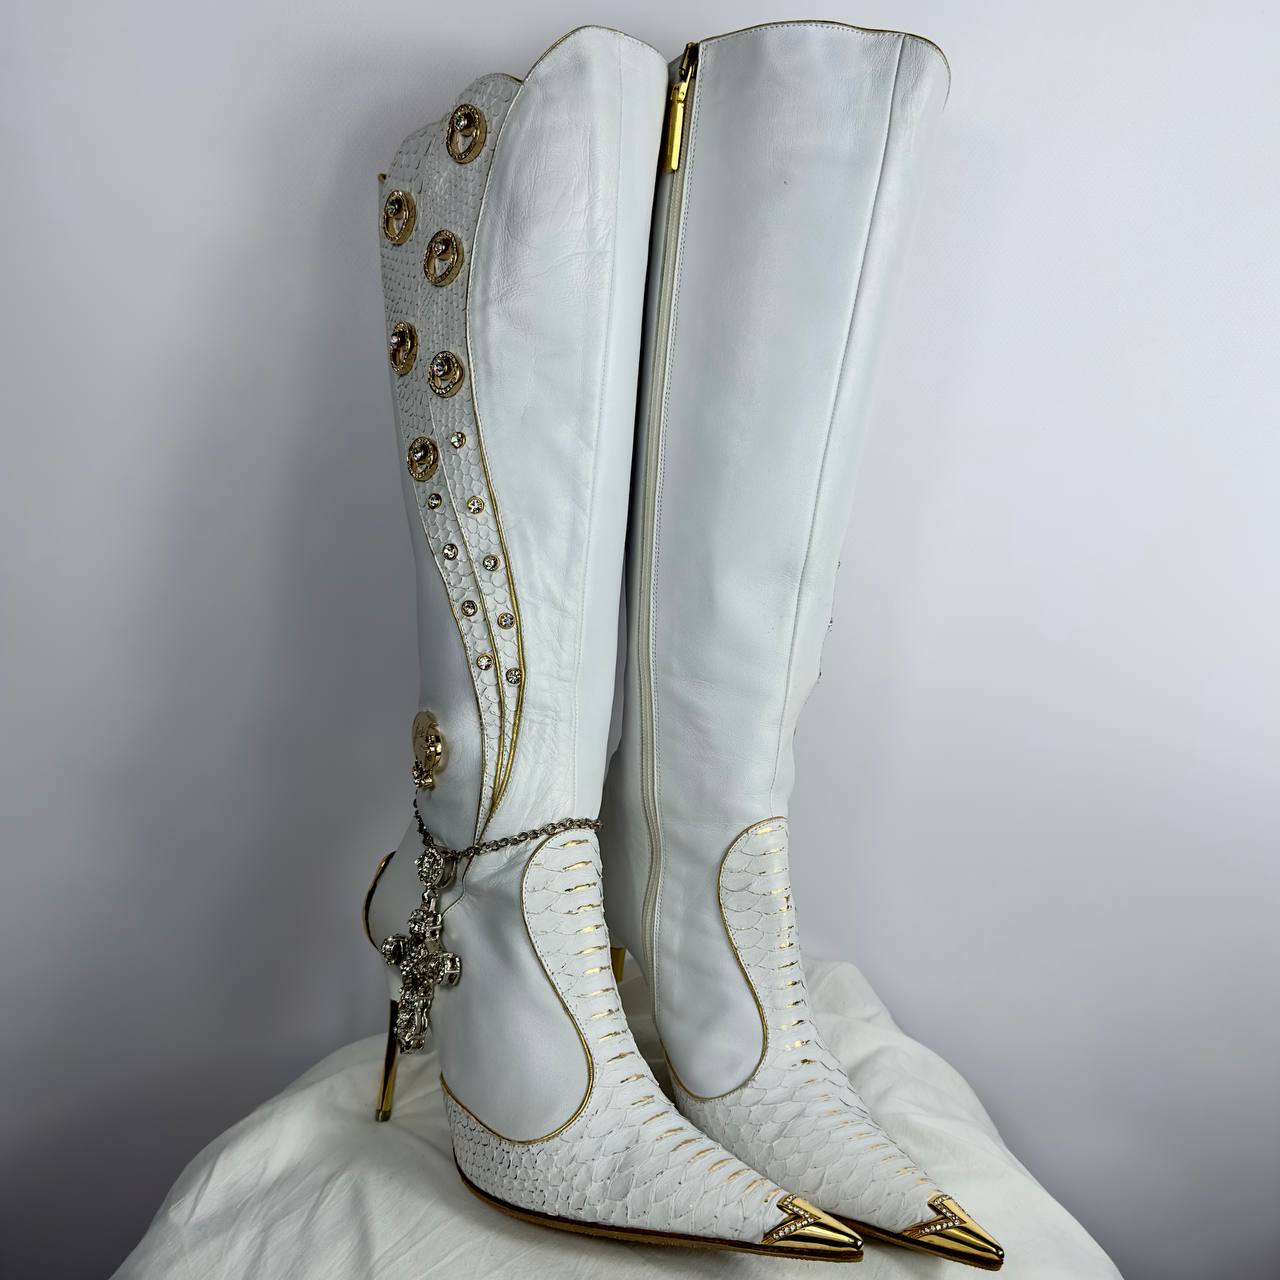 Hamlet Couture Italian Python Leather Boots 37.5/38.5